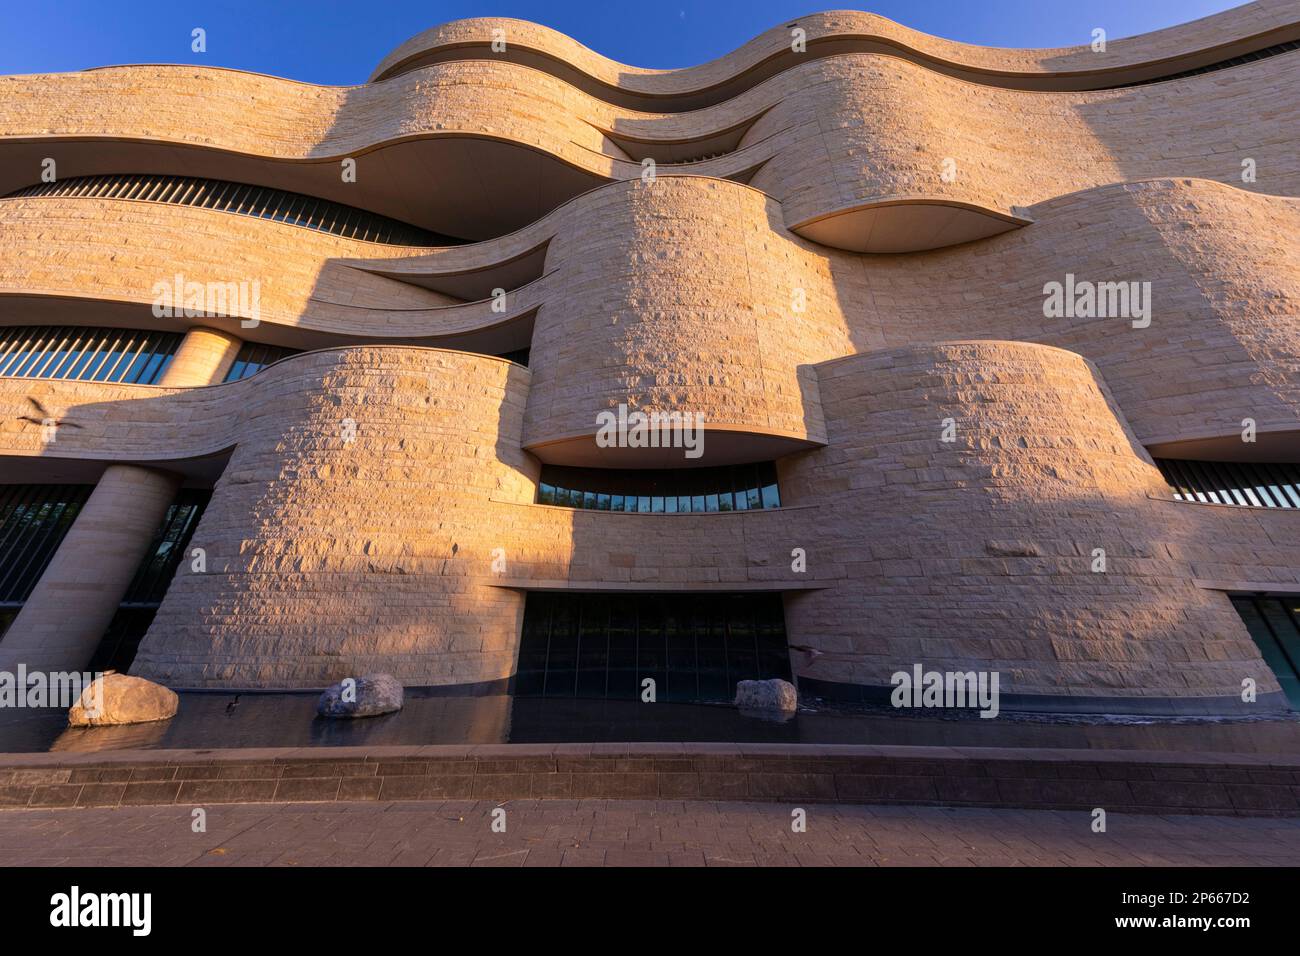 Lo Smithsonian Institution National Museum of the American Indian on the National Mall, Washington, D.C., Stati Uniti d'America, Nord America Foto Stock